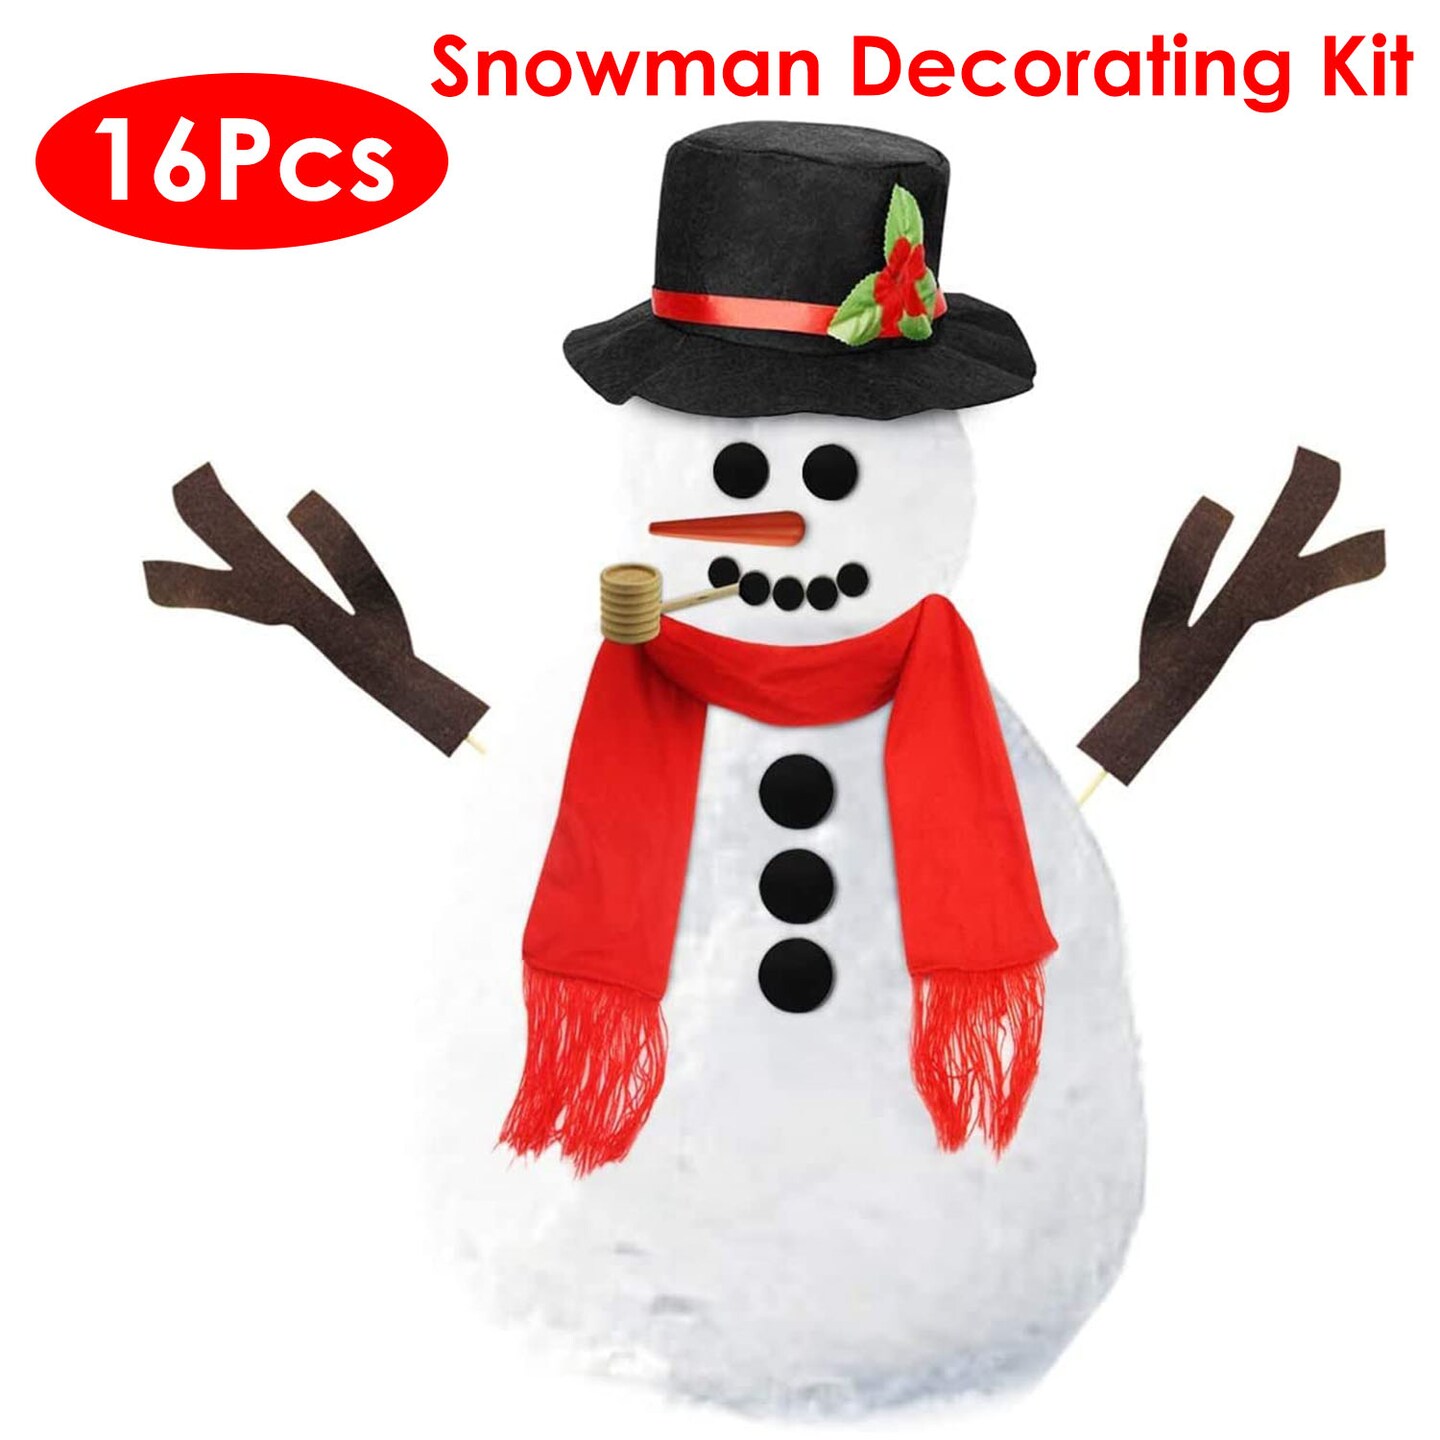 Build A Snowman Kit Best Brands Just Add Snow Small Size